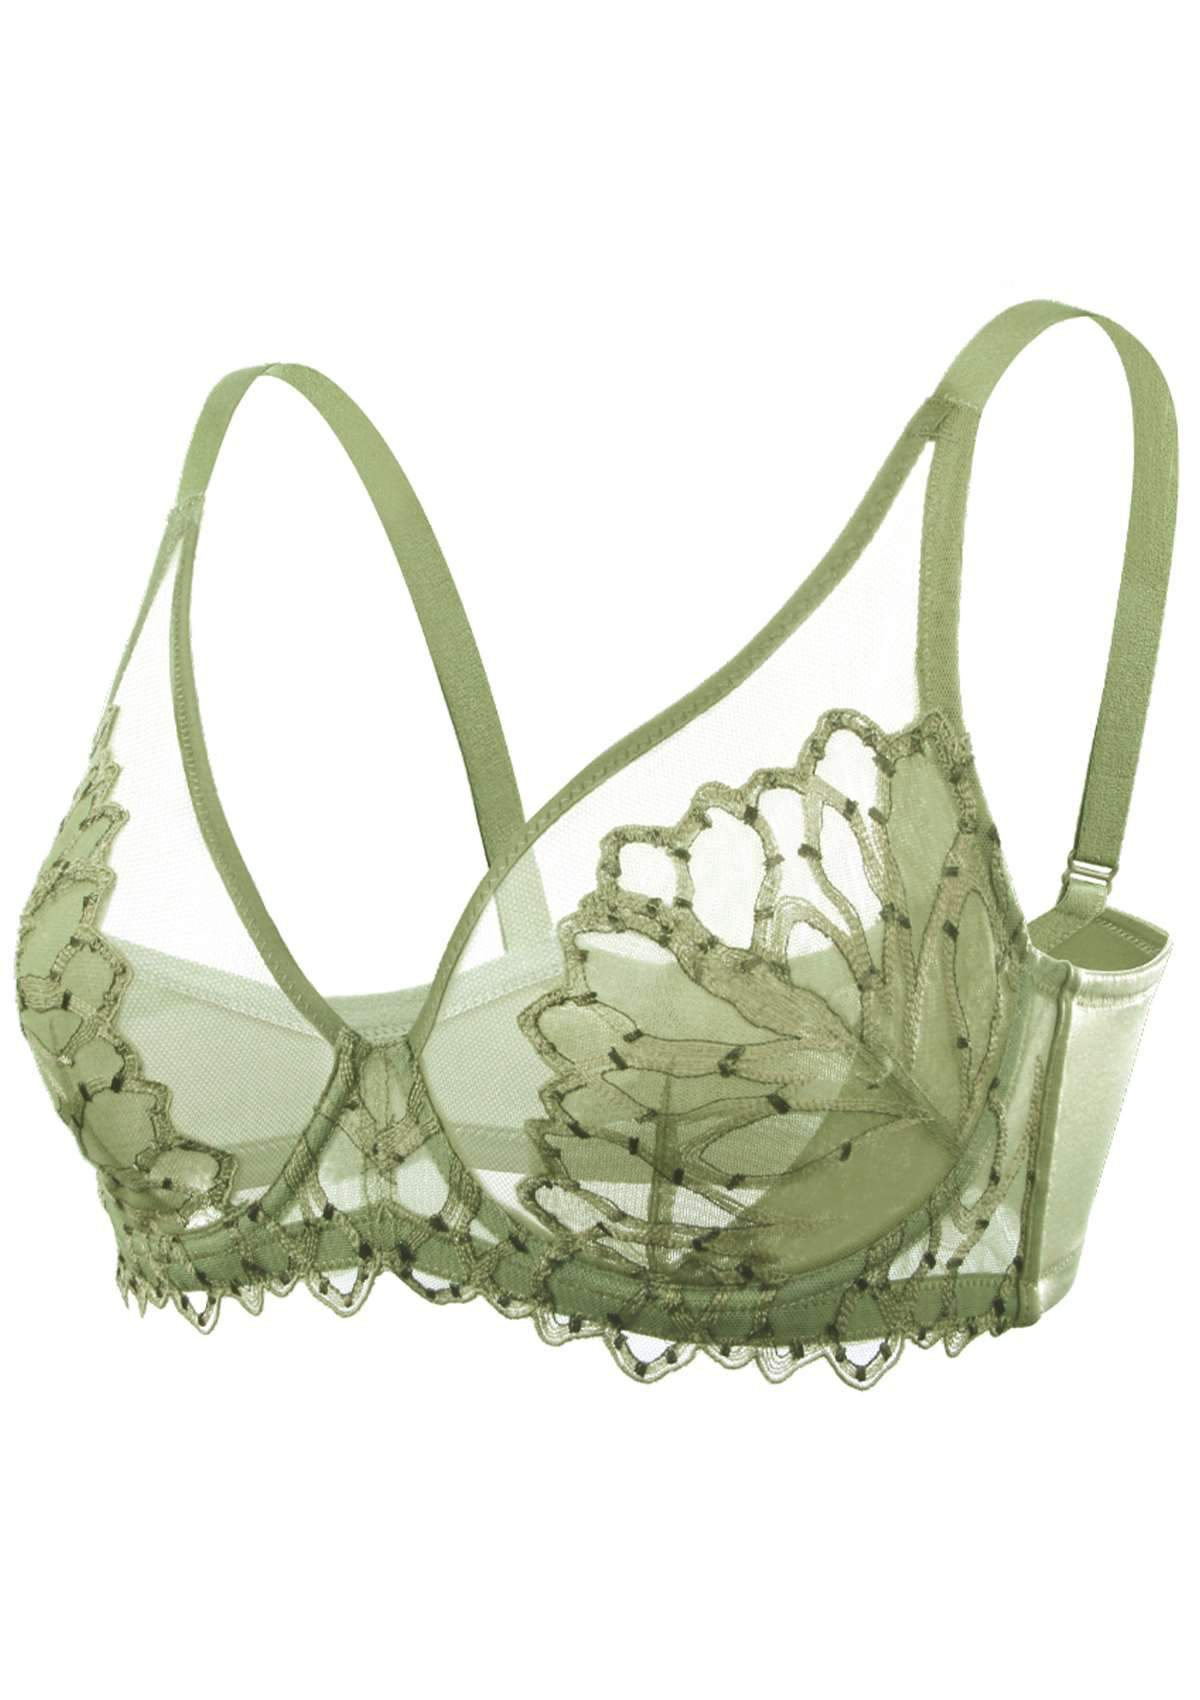 HSIA Chrysanthemum Floral Embroidered Bra: Lace Sheer Unpadded Bra - Crystal Blue / 36 / C